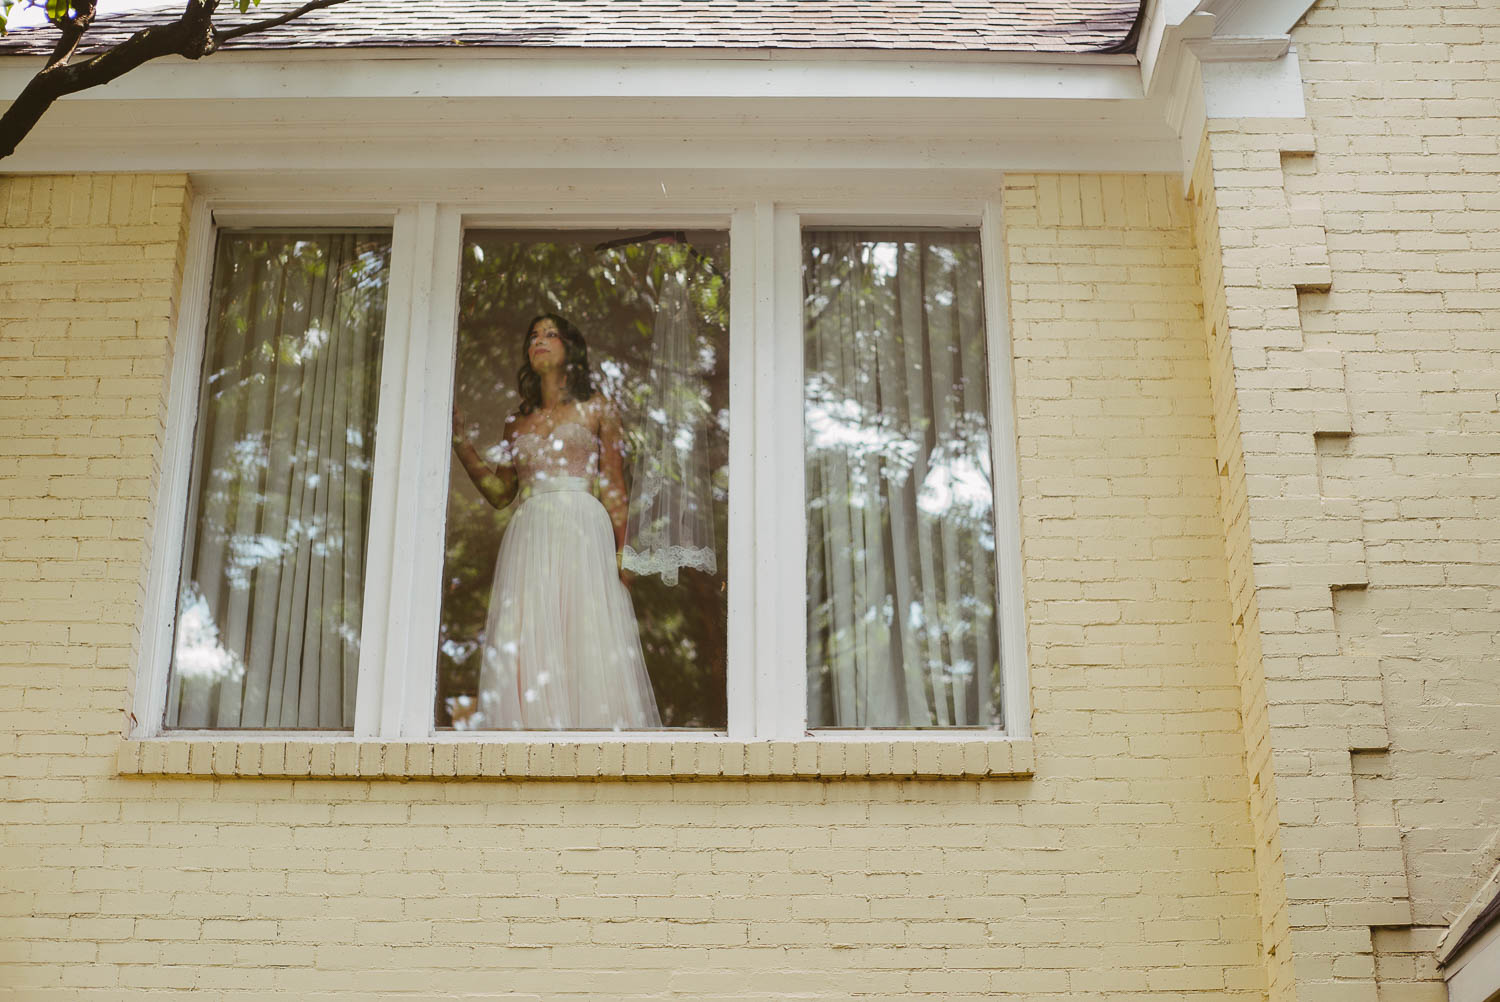 Houston Texas. Scene from her aunt's home as she stands in window-Leica photographer-Philip Thomas Photography